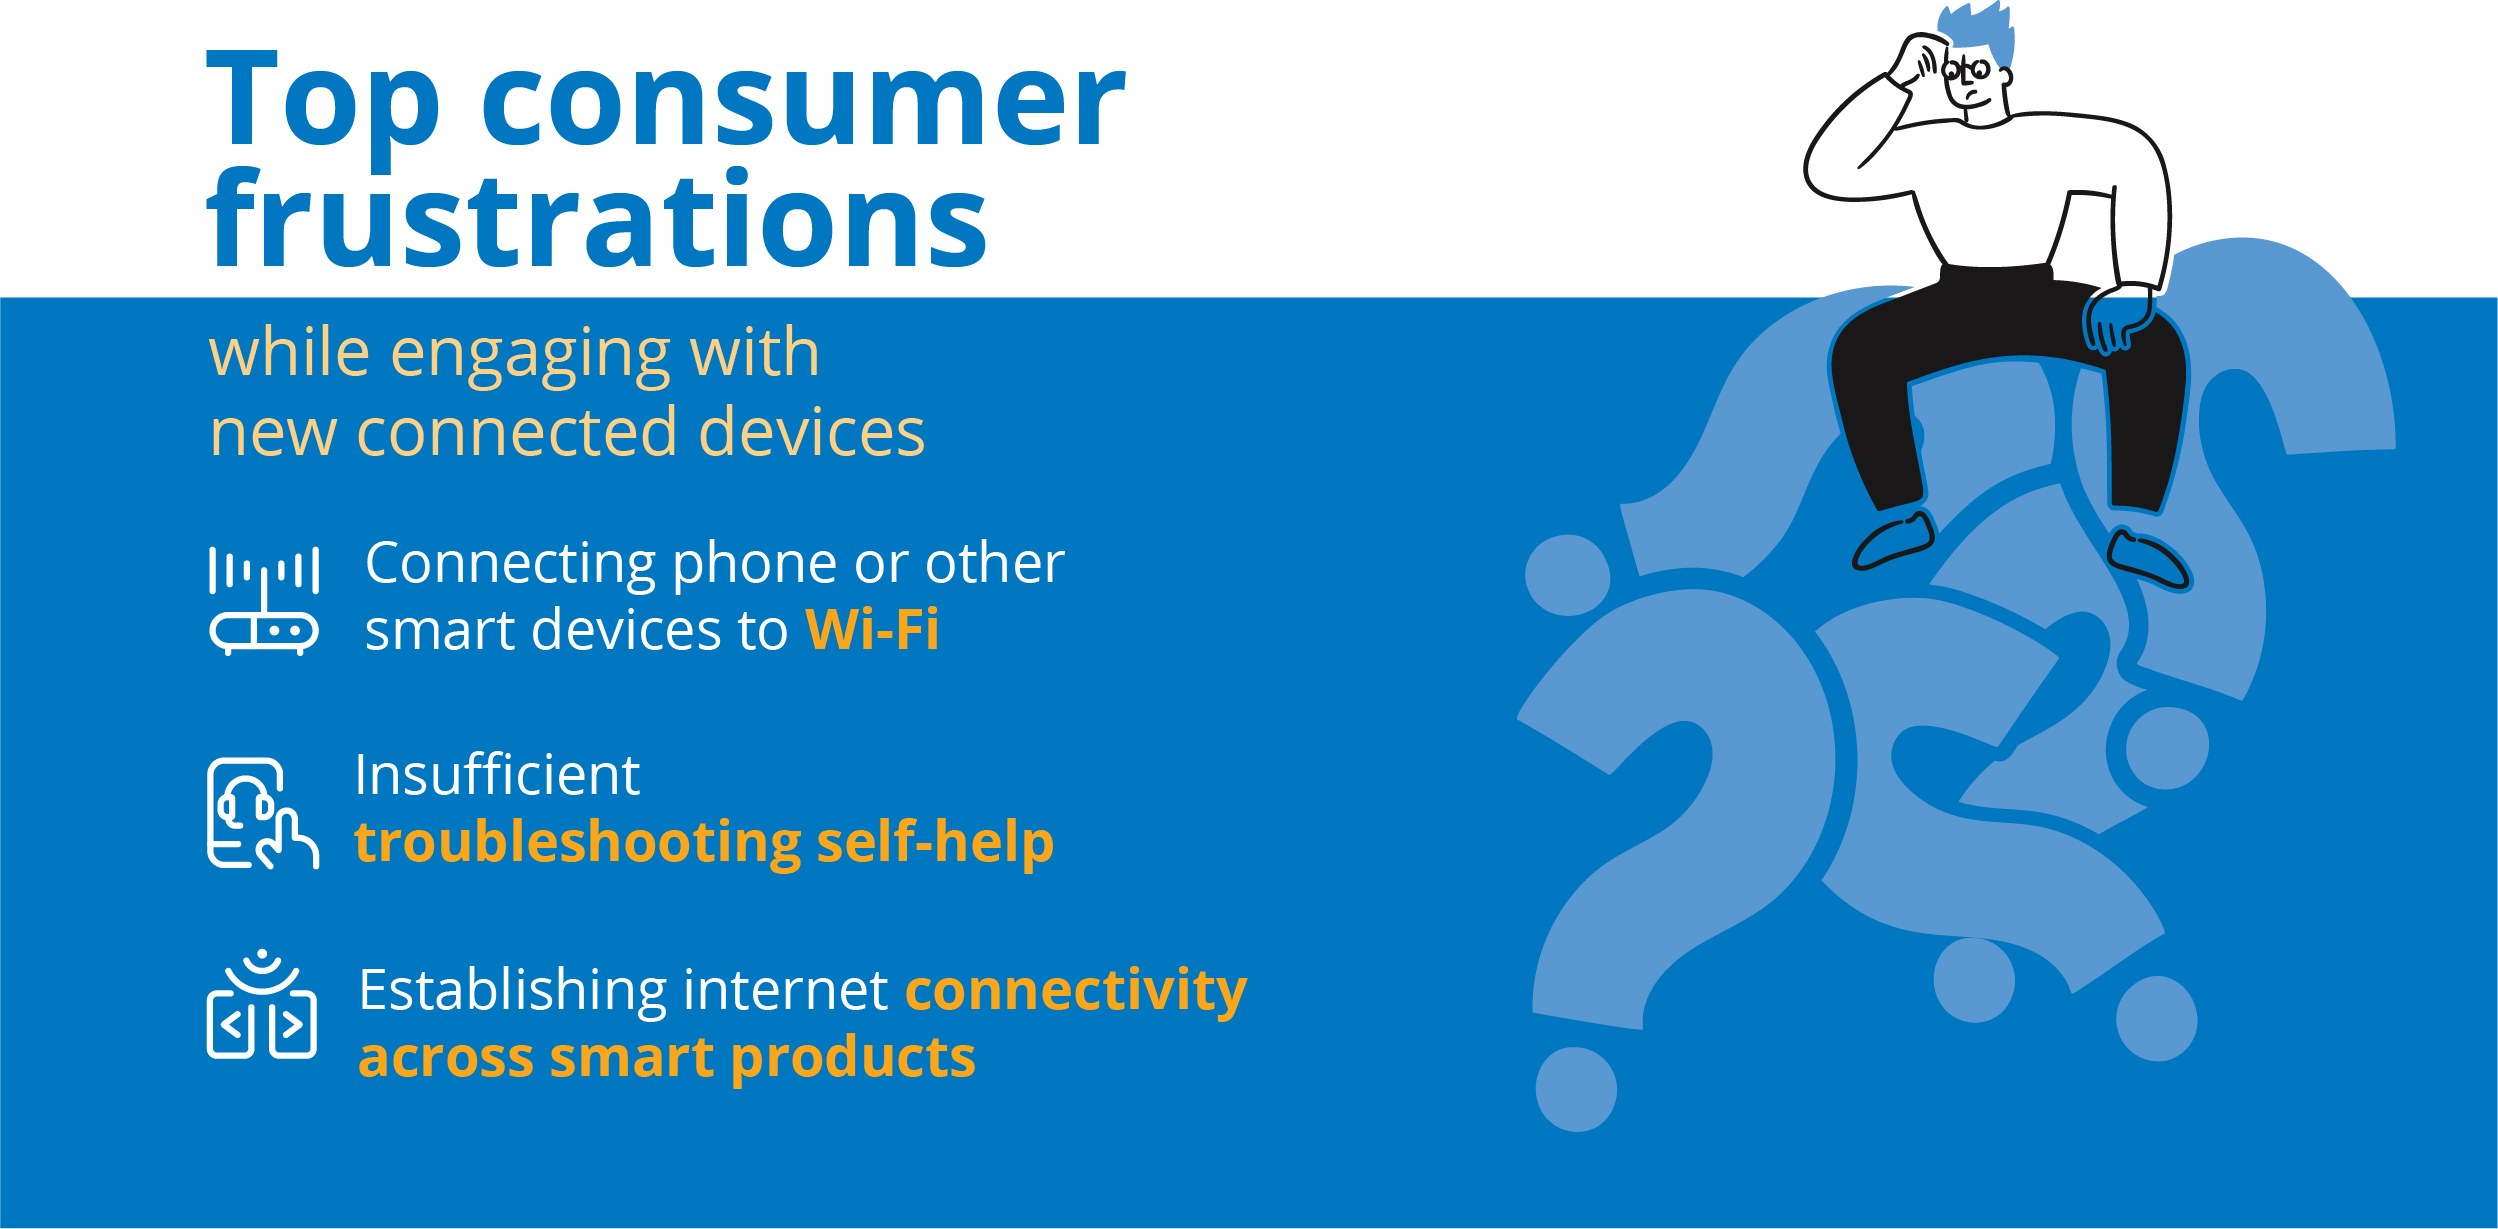 Illustrated image depicting the top consumer frustrations for connected consumers, which is detailed in the text